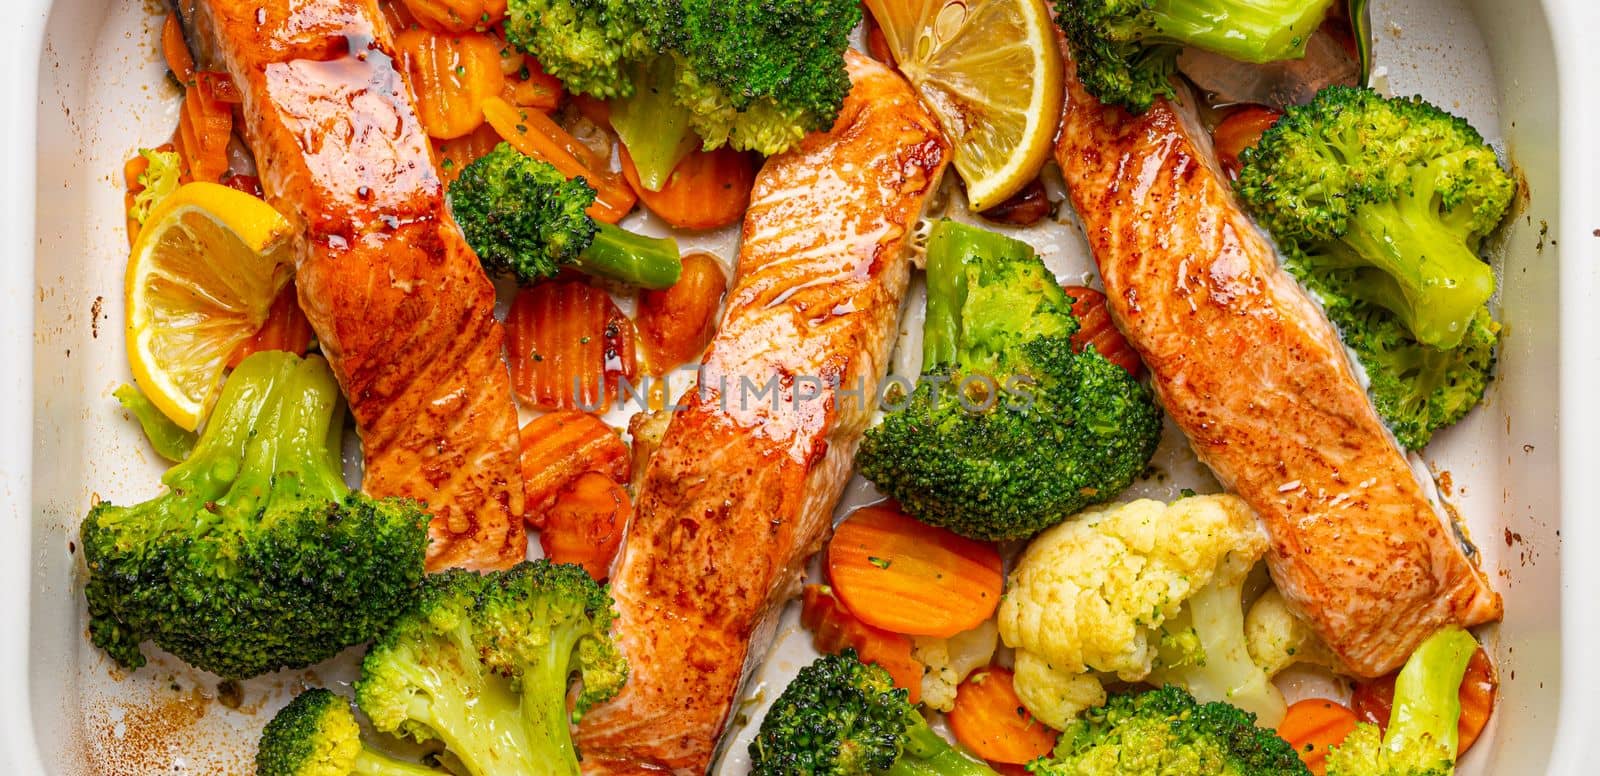 Top view close up of healthy baked fish salmon steaks, broccoli, cauliflower, carrot in casserole dish. Cooking a delicious low carb dinner, healthy nutrition concept.